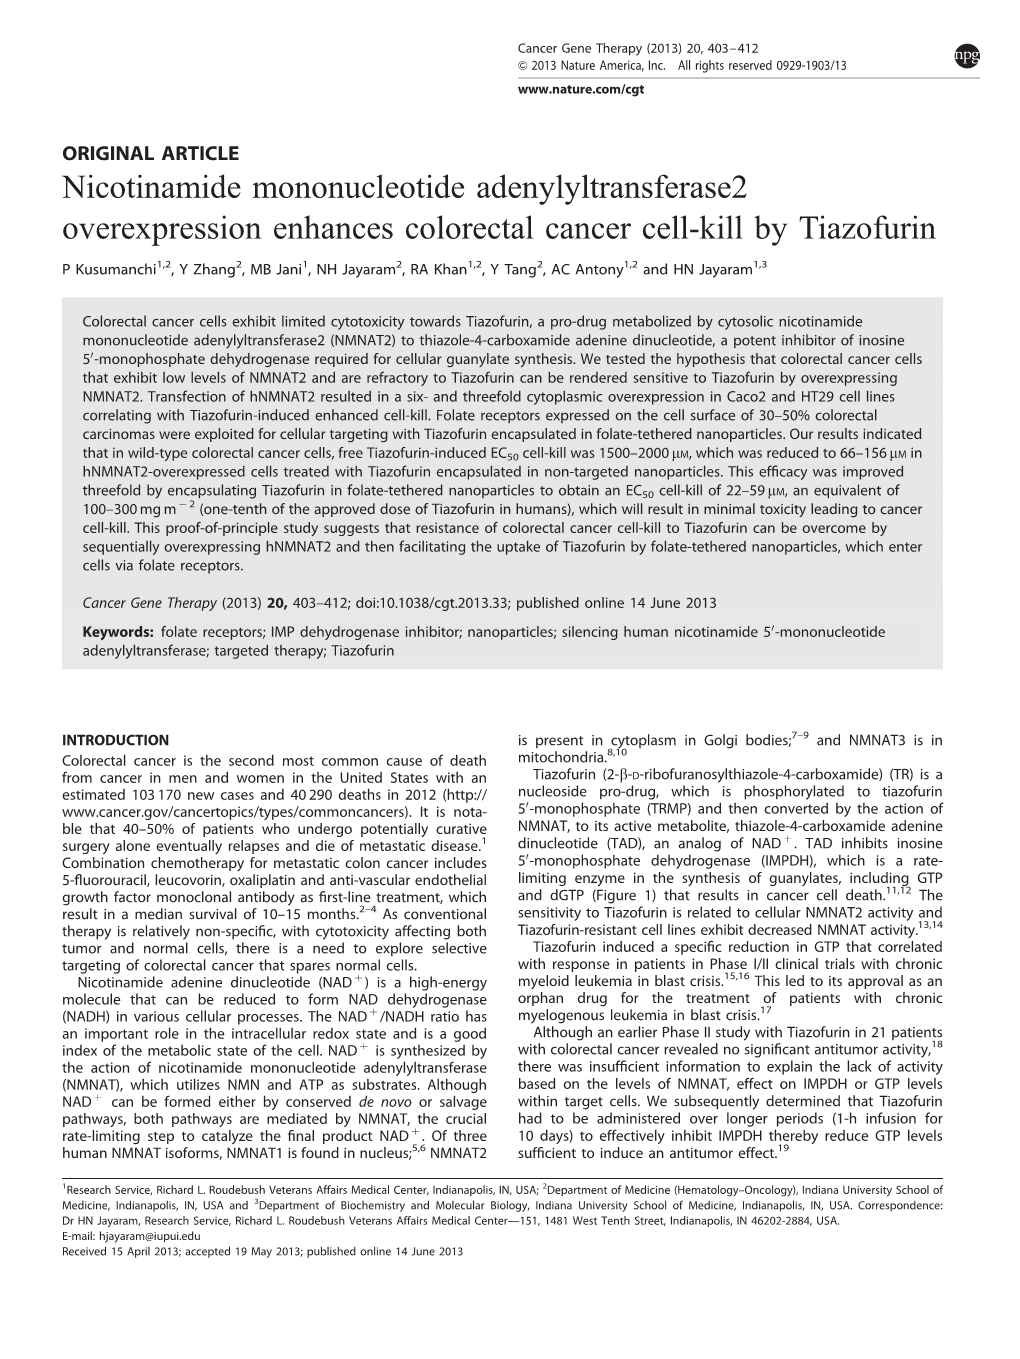 Nicotinamide Mononucleotide Adenylyltransferase2 Overexpression Enhances Colorectal Cancer Cell-Kill by Tiazofurin